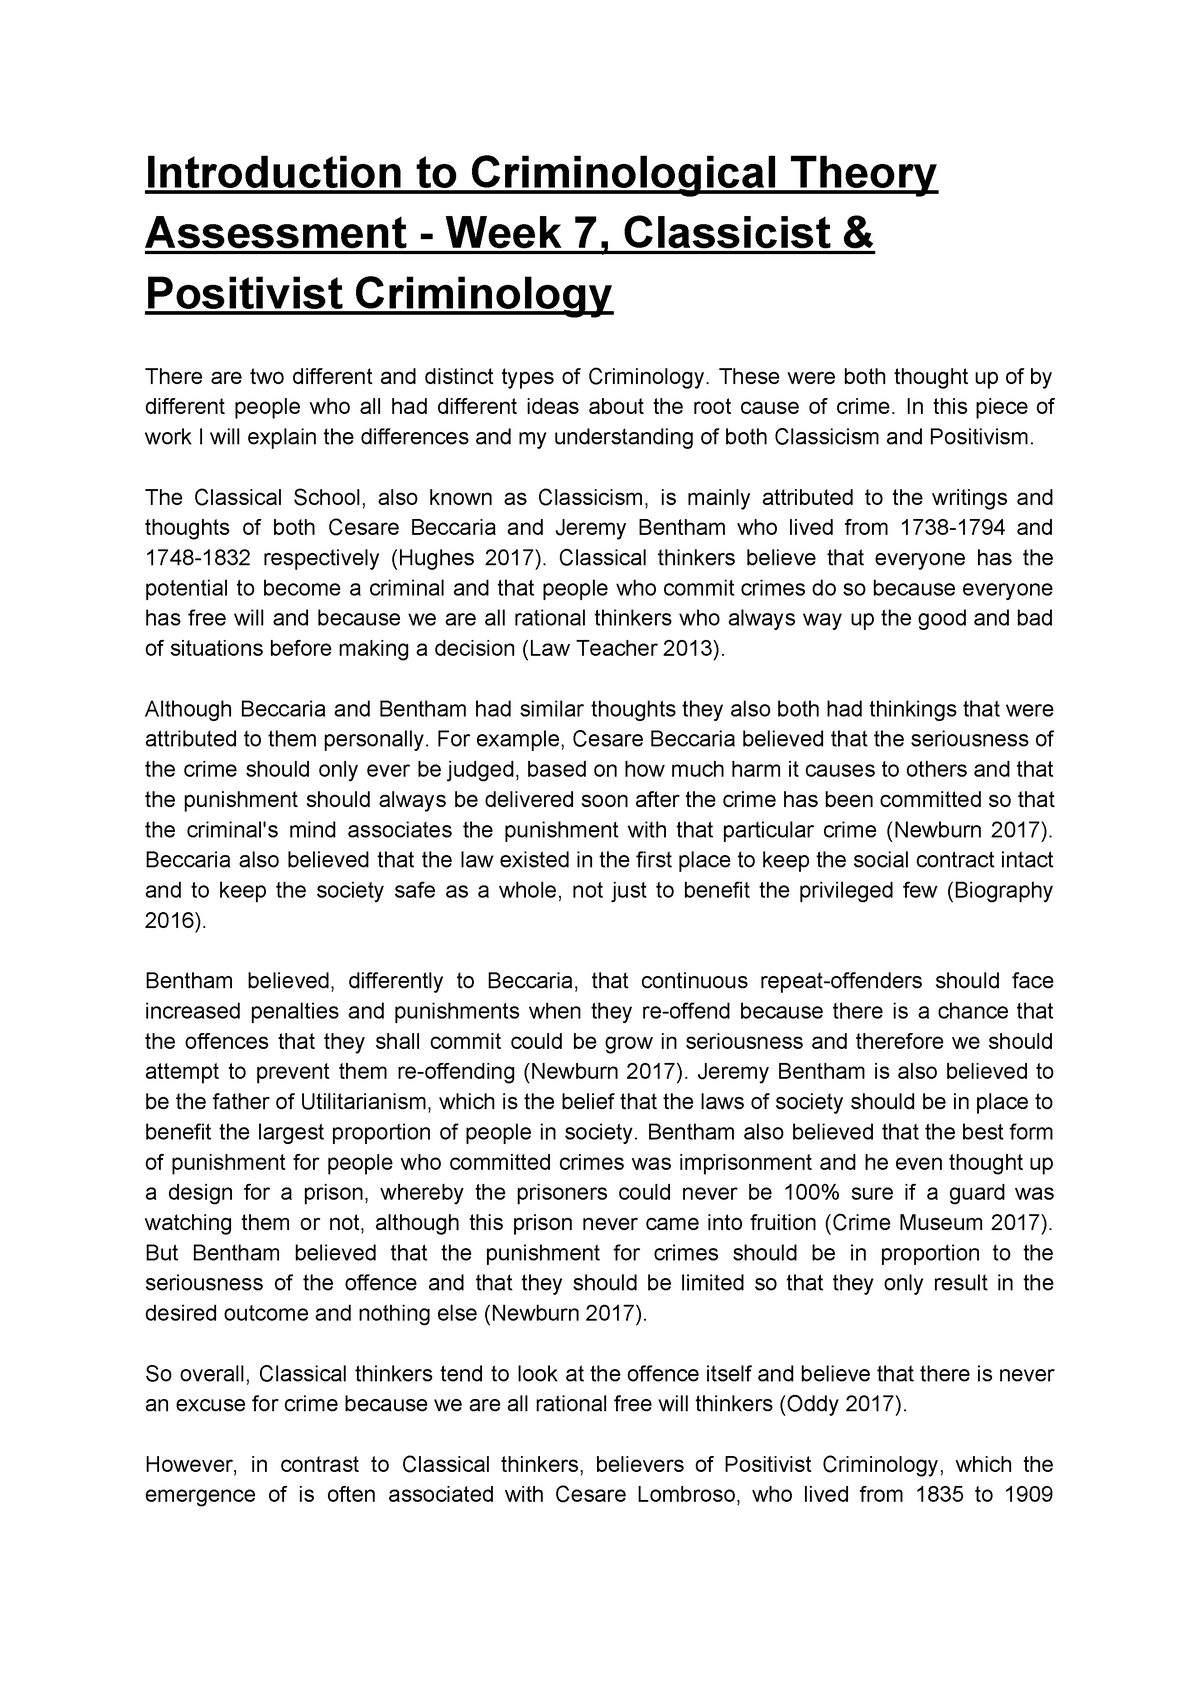 thesis about criminology pdf